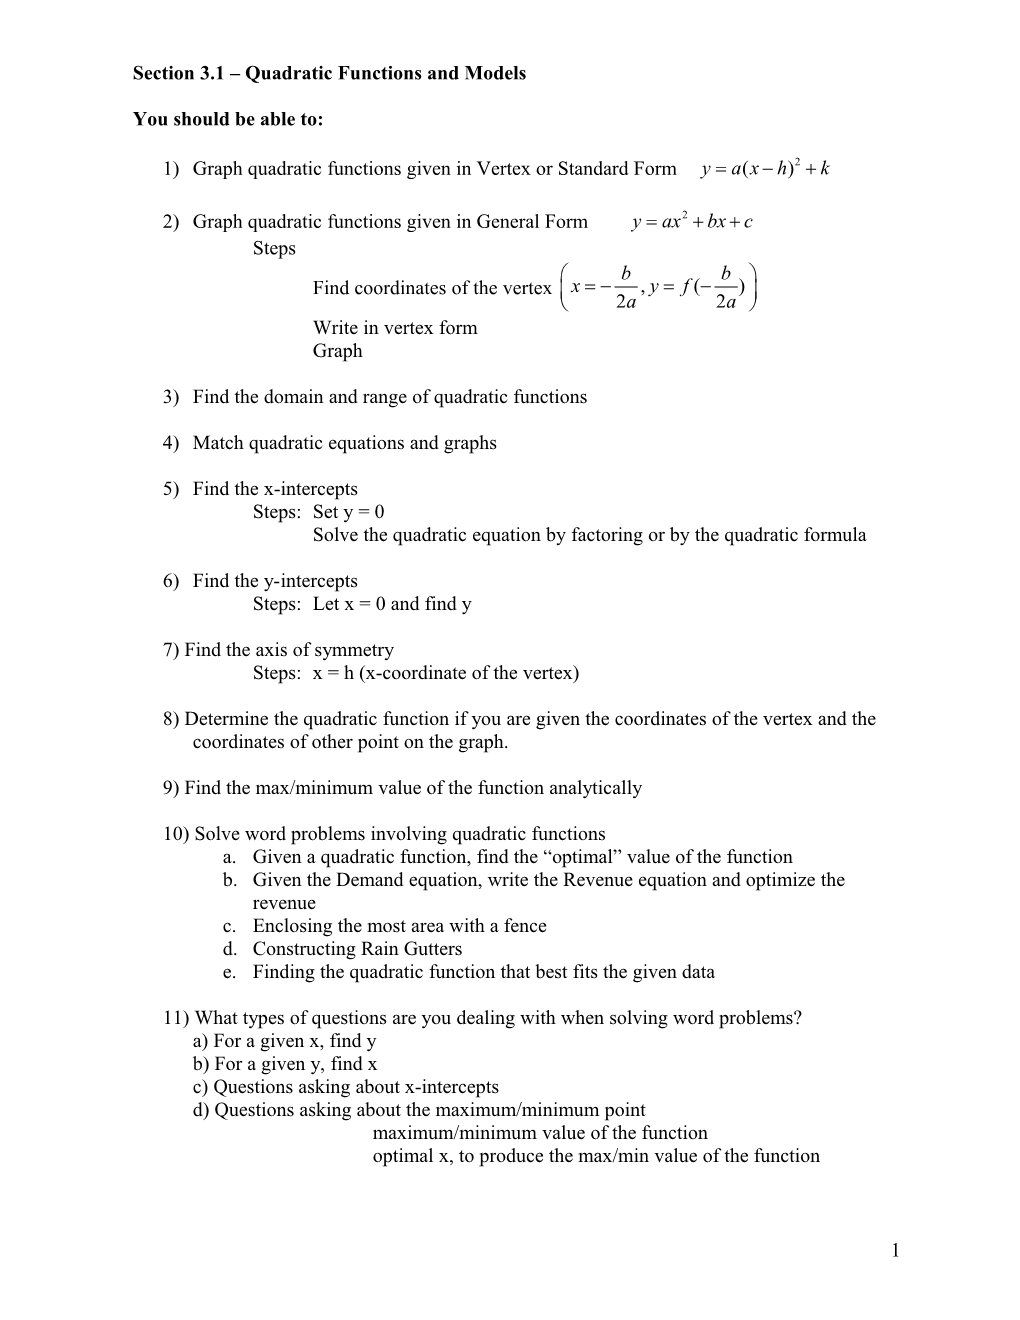 Section 3.1 Quadratic Functions and Models